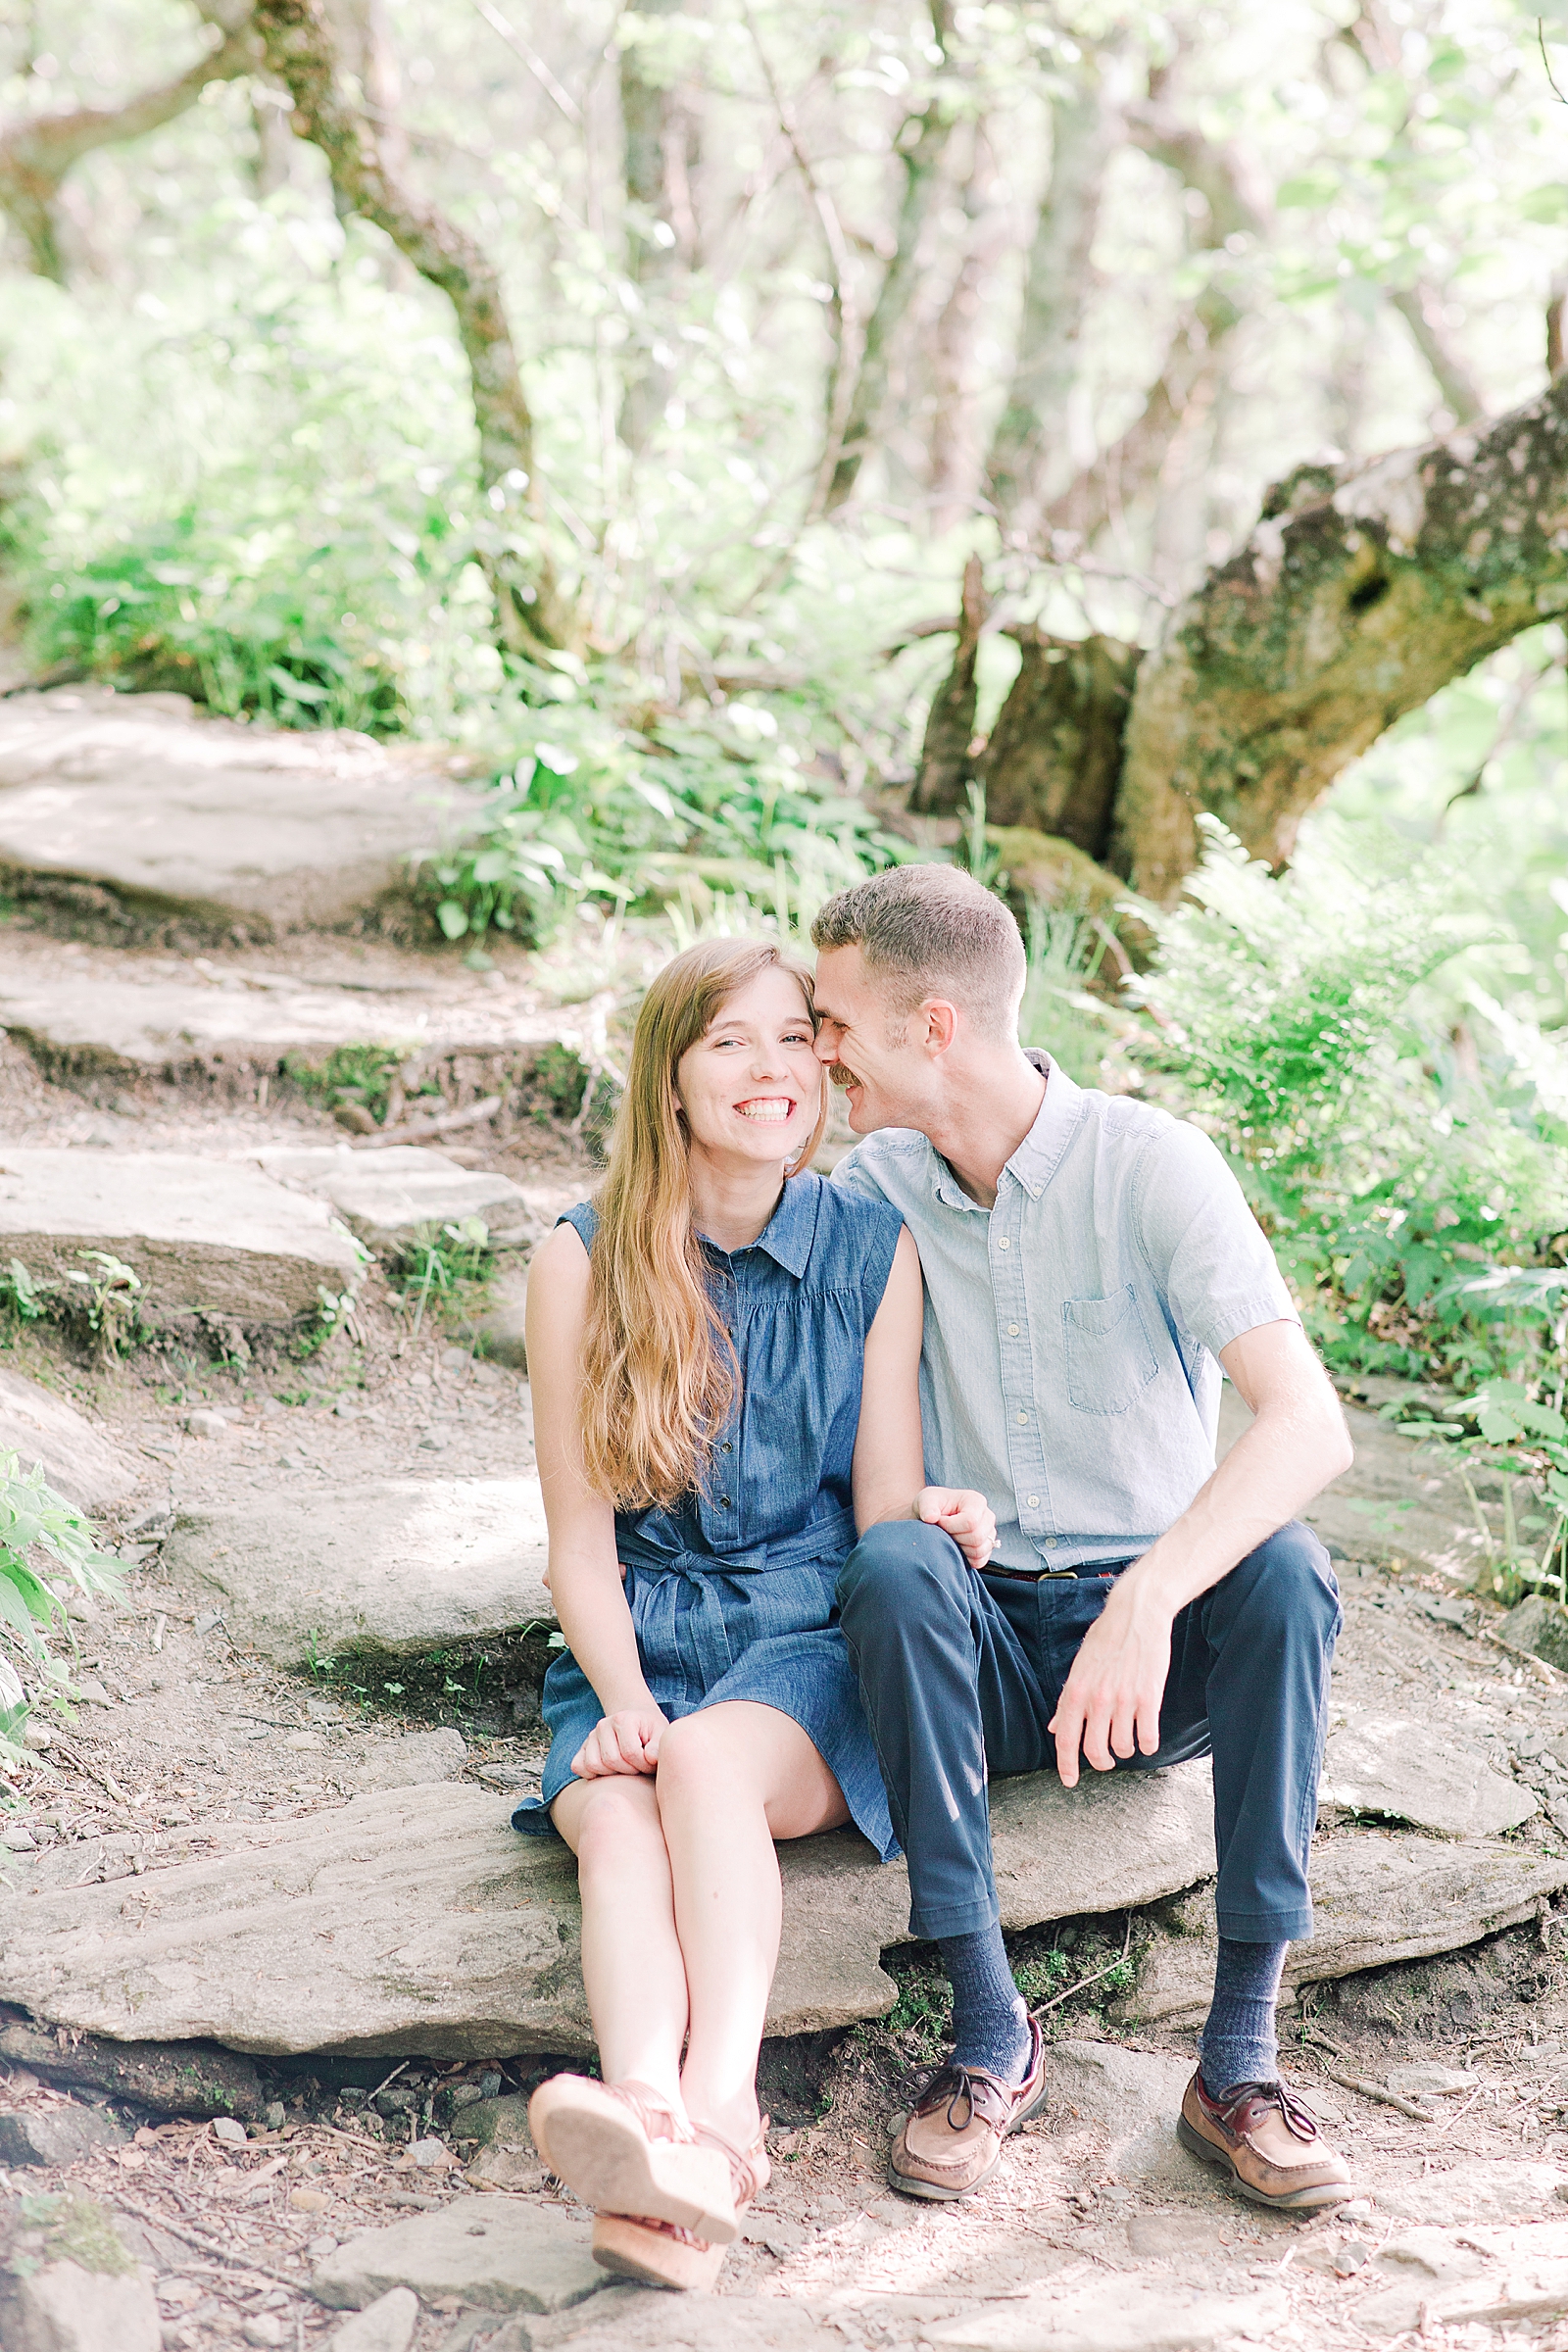 Craggy Gardens Engagement Couple Sitting on Rocks in Woods Snuggling Photo